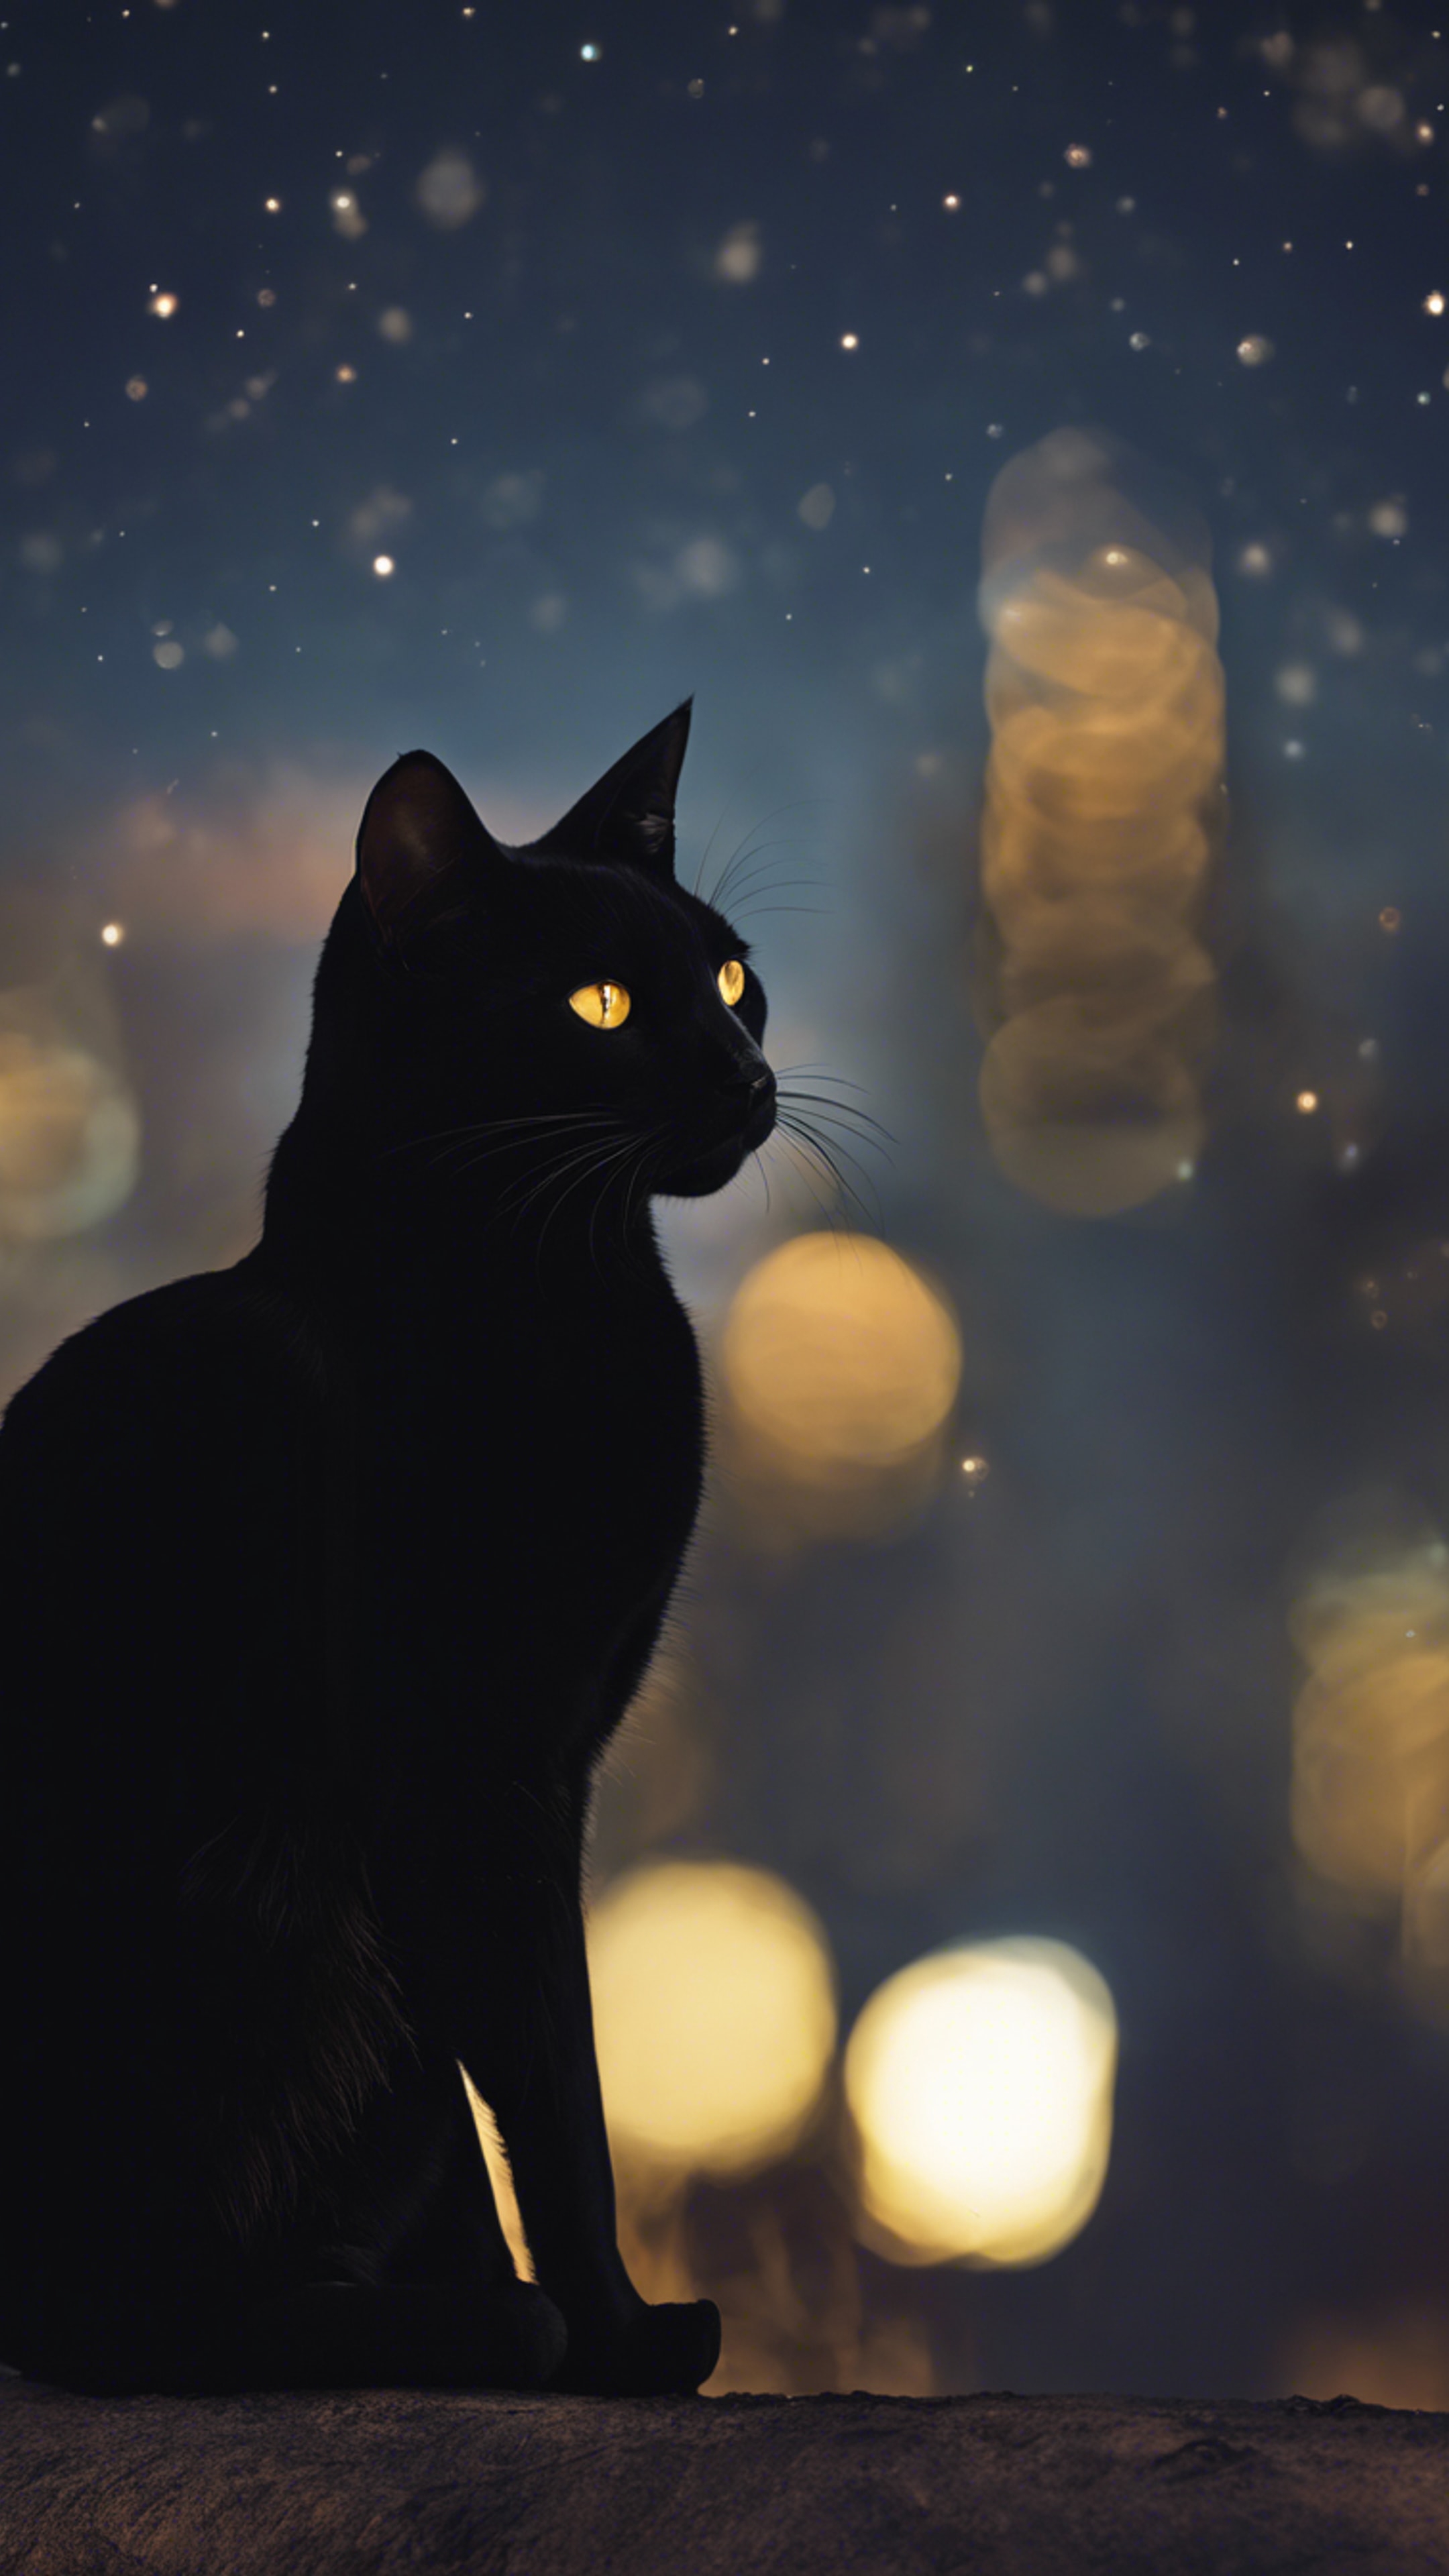 A Bombay cat blending into the night sky, only its faint silhouette and gleaming yellow eyes visible. Wallpaper[8e715ef55e7e4610816a]